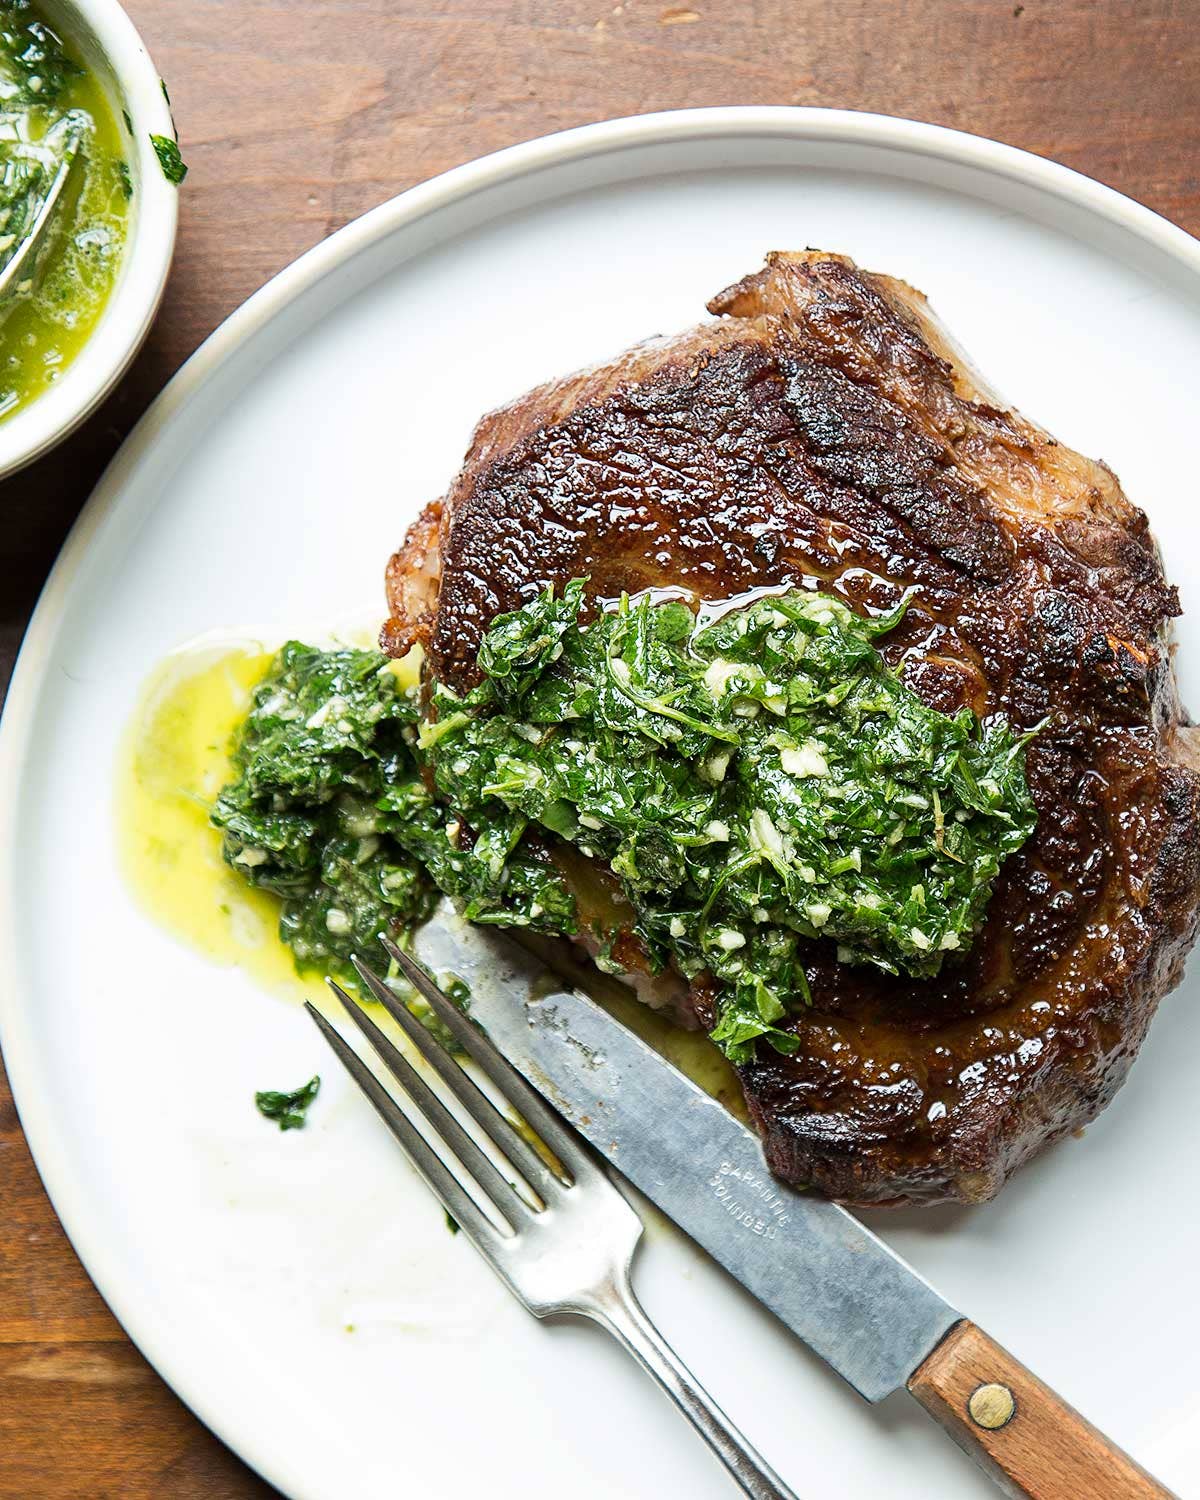 Make the Perfect Steak With Any Cut